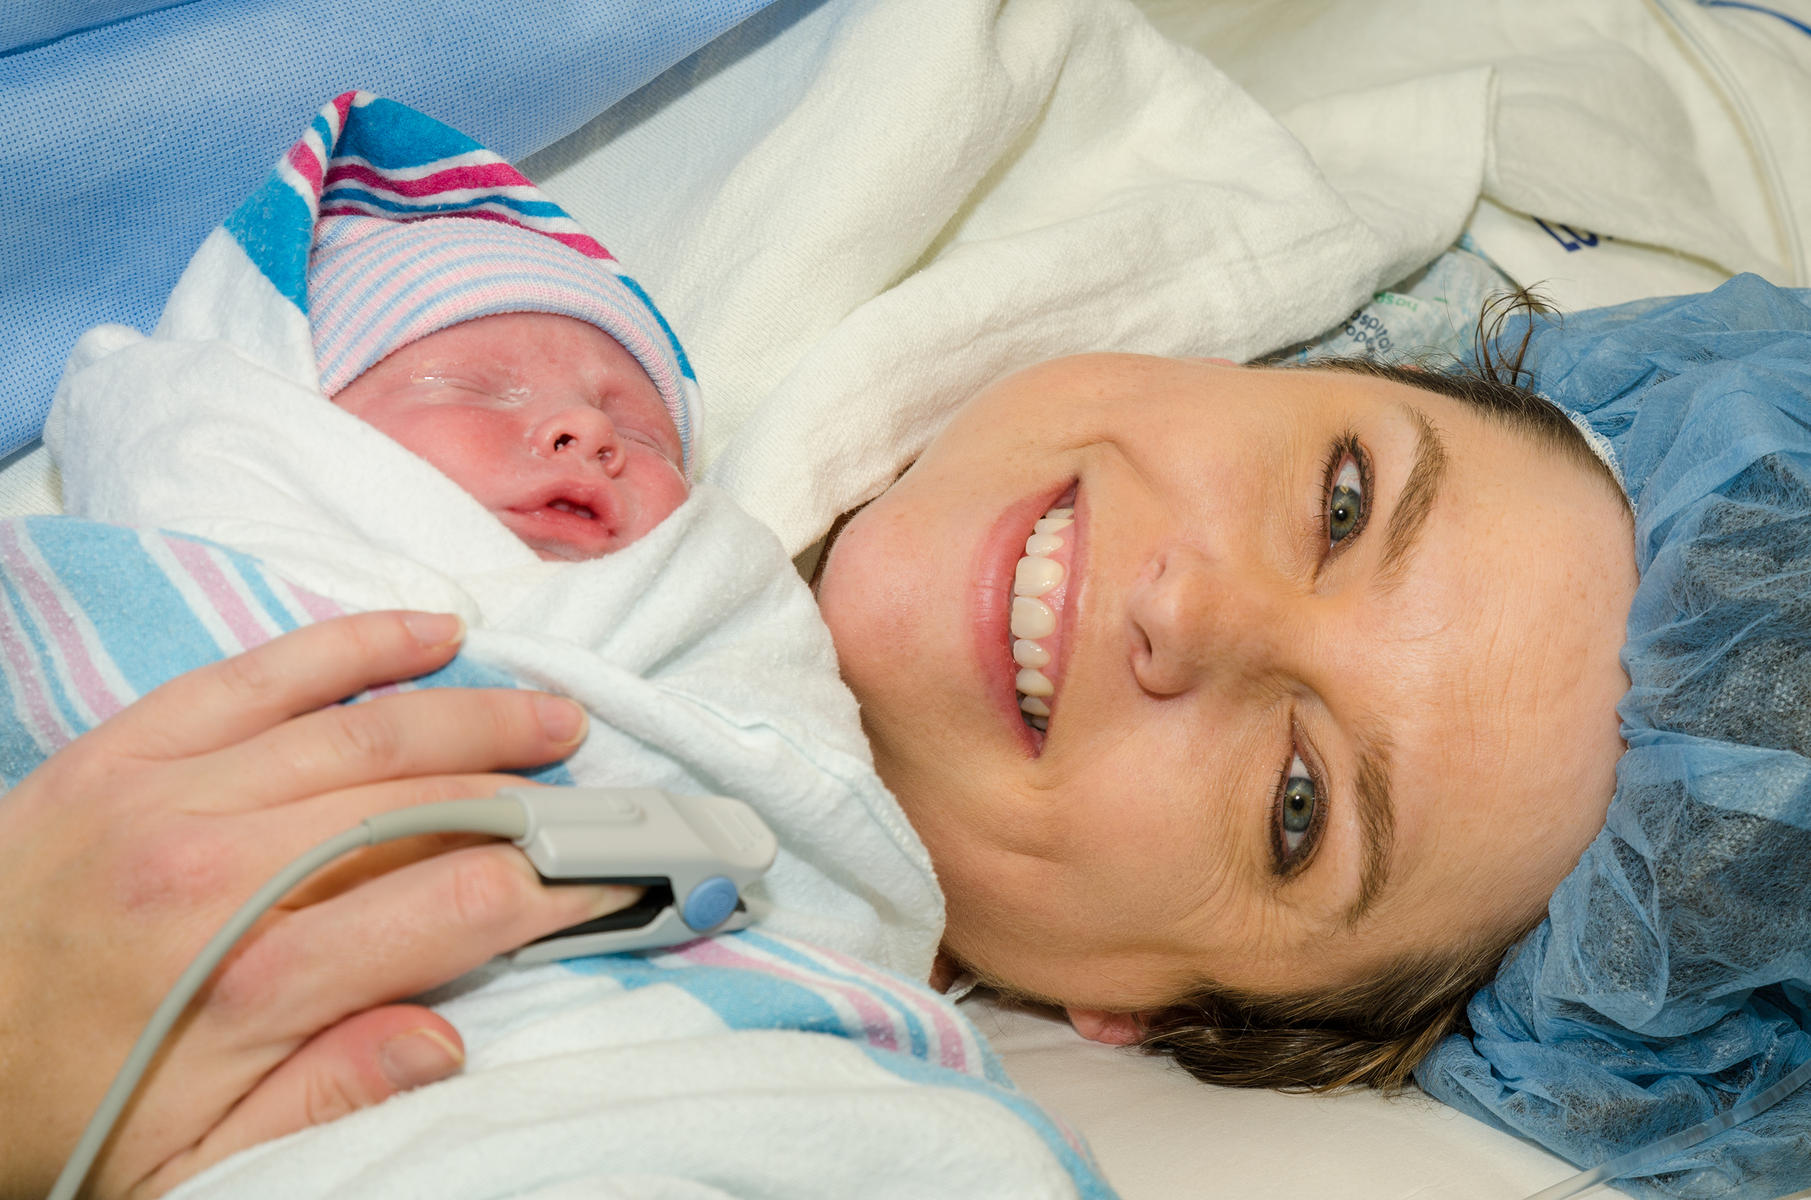 Mom holding baby after c-section or Cesarean birth.